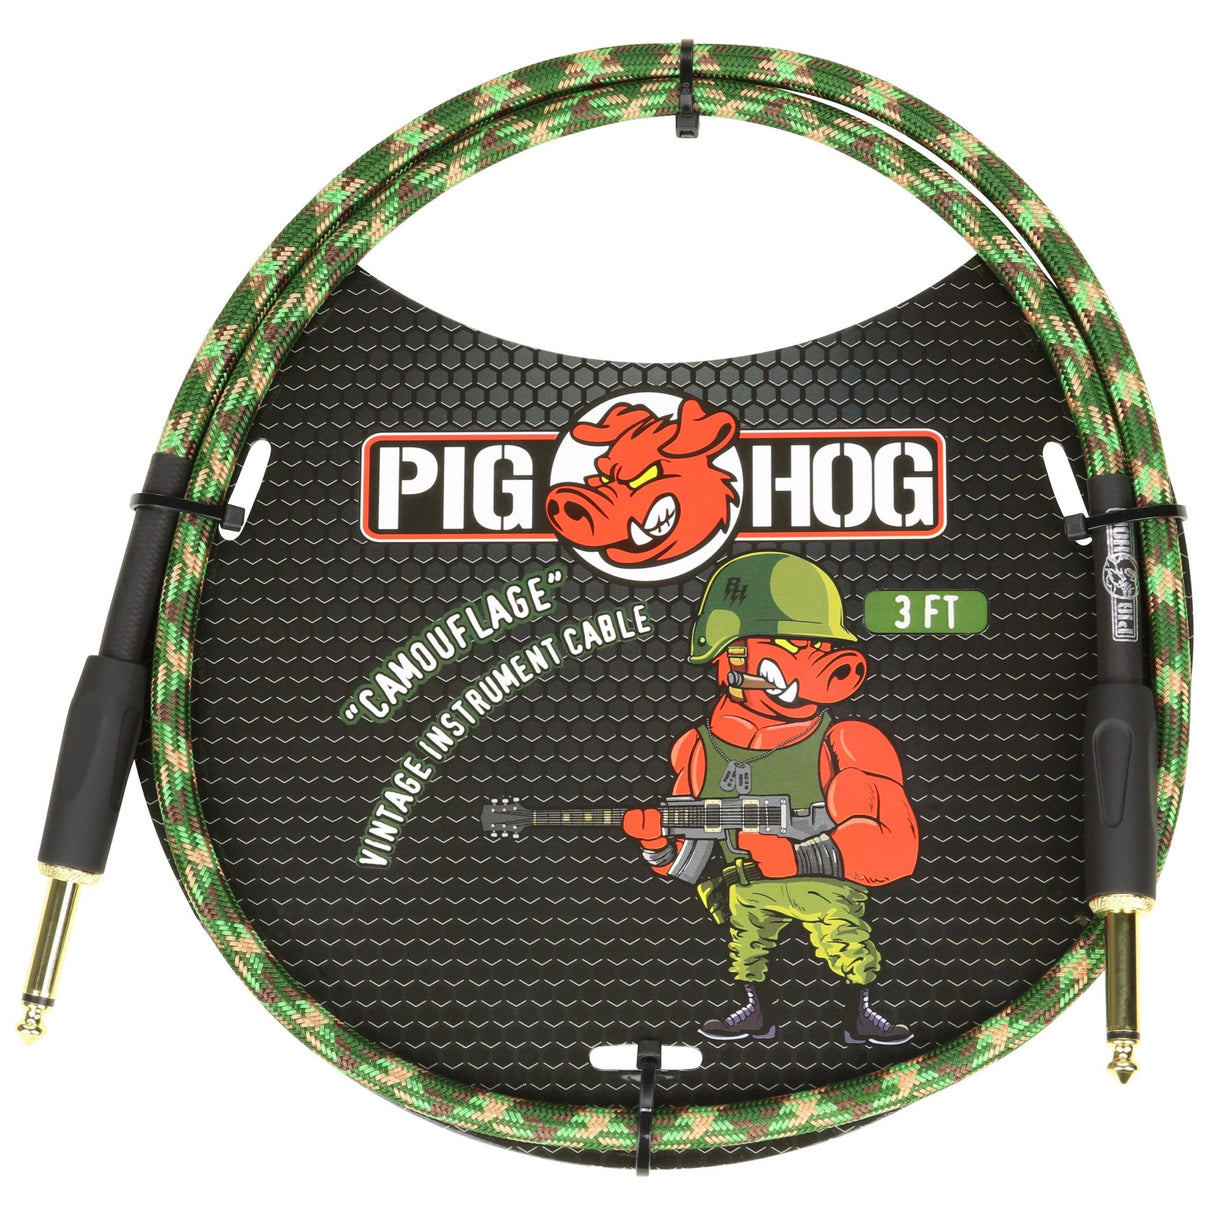 Pig Hog PCH3CF "Camouflage" 3ft Right Angled Patch Cables